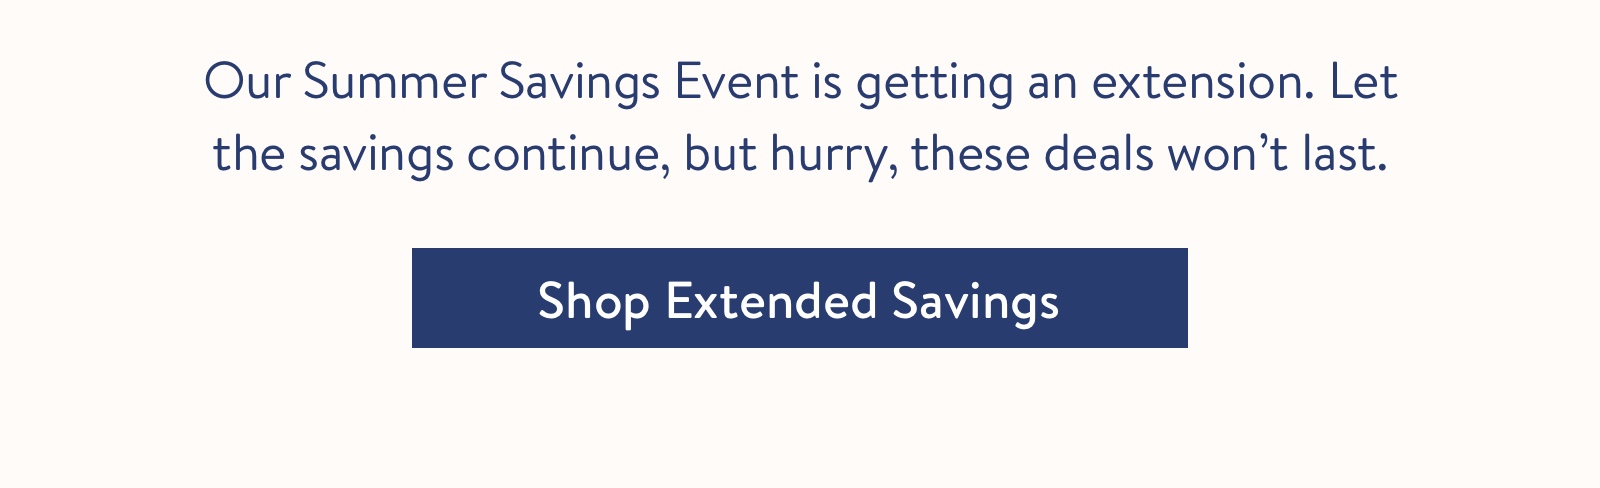 Our Summer Savings Event is getting an extension. Let the savings continue, but hurry, these deals won''t last.